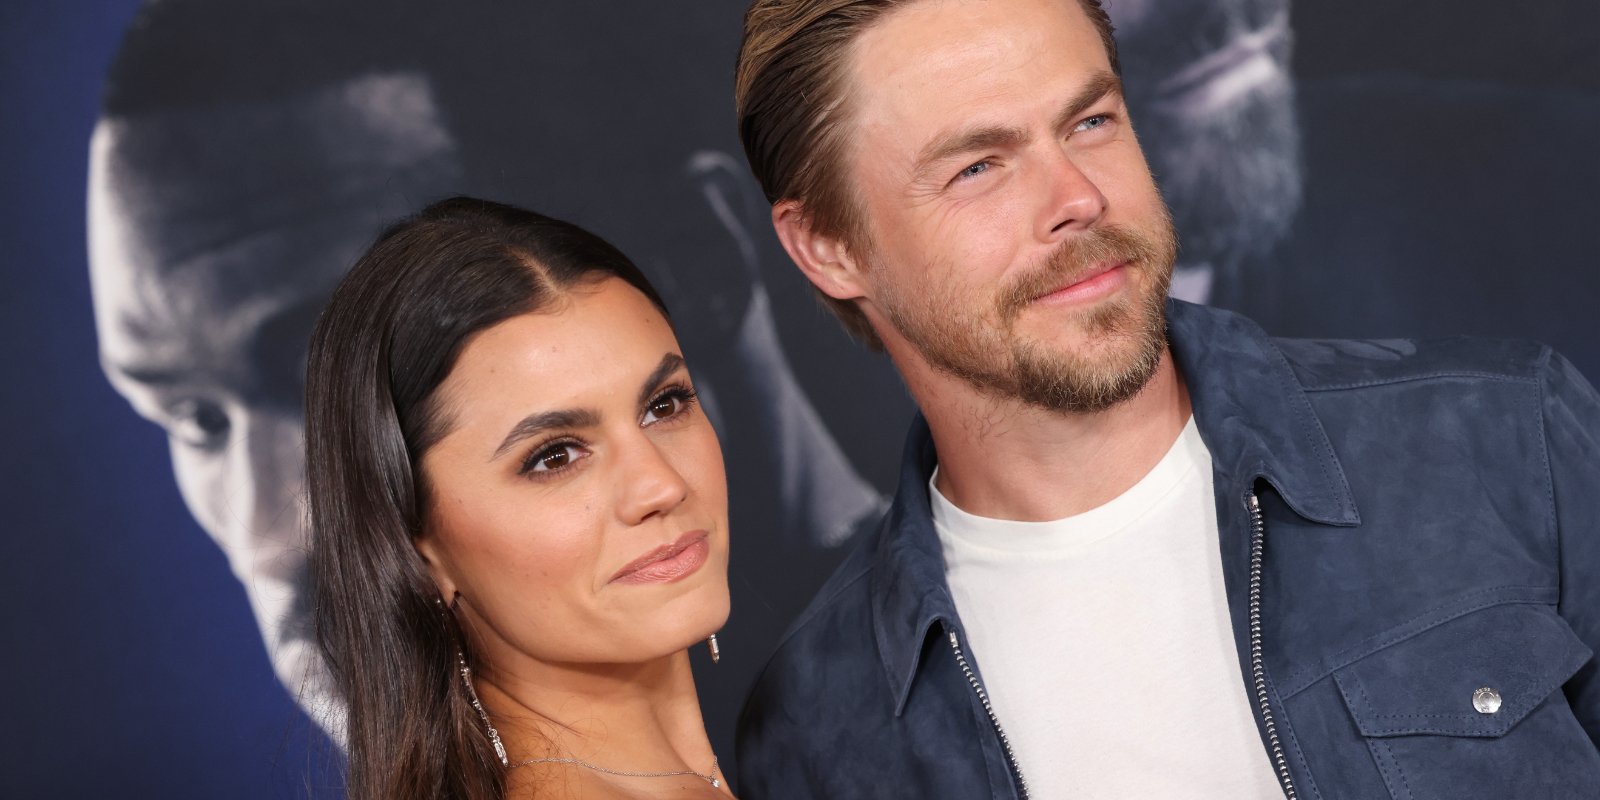 'Dancing with the Stars' judge Derek Hough and fiance Hayley Erbert pose together on the red carpet.